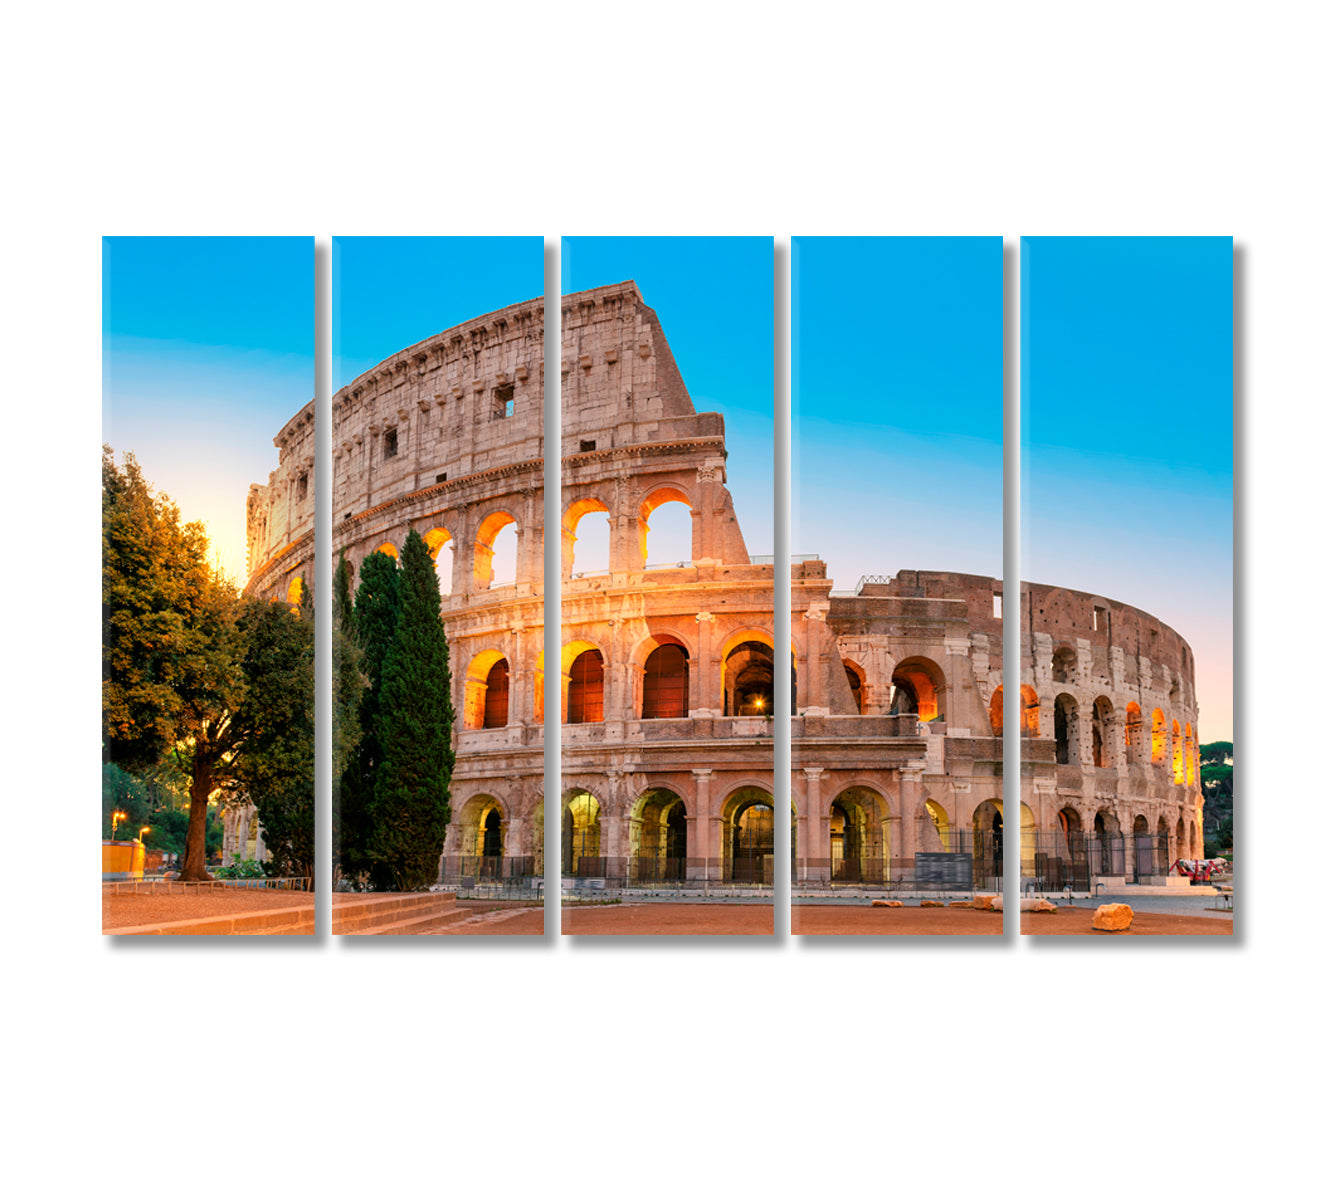 Famous Colosseum in Rome Italy Canvas Print-Canvas Print-CetArt-5 Panels-36x24 inches-CetArt